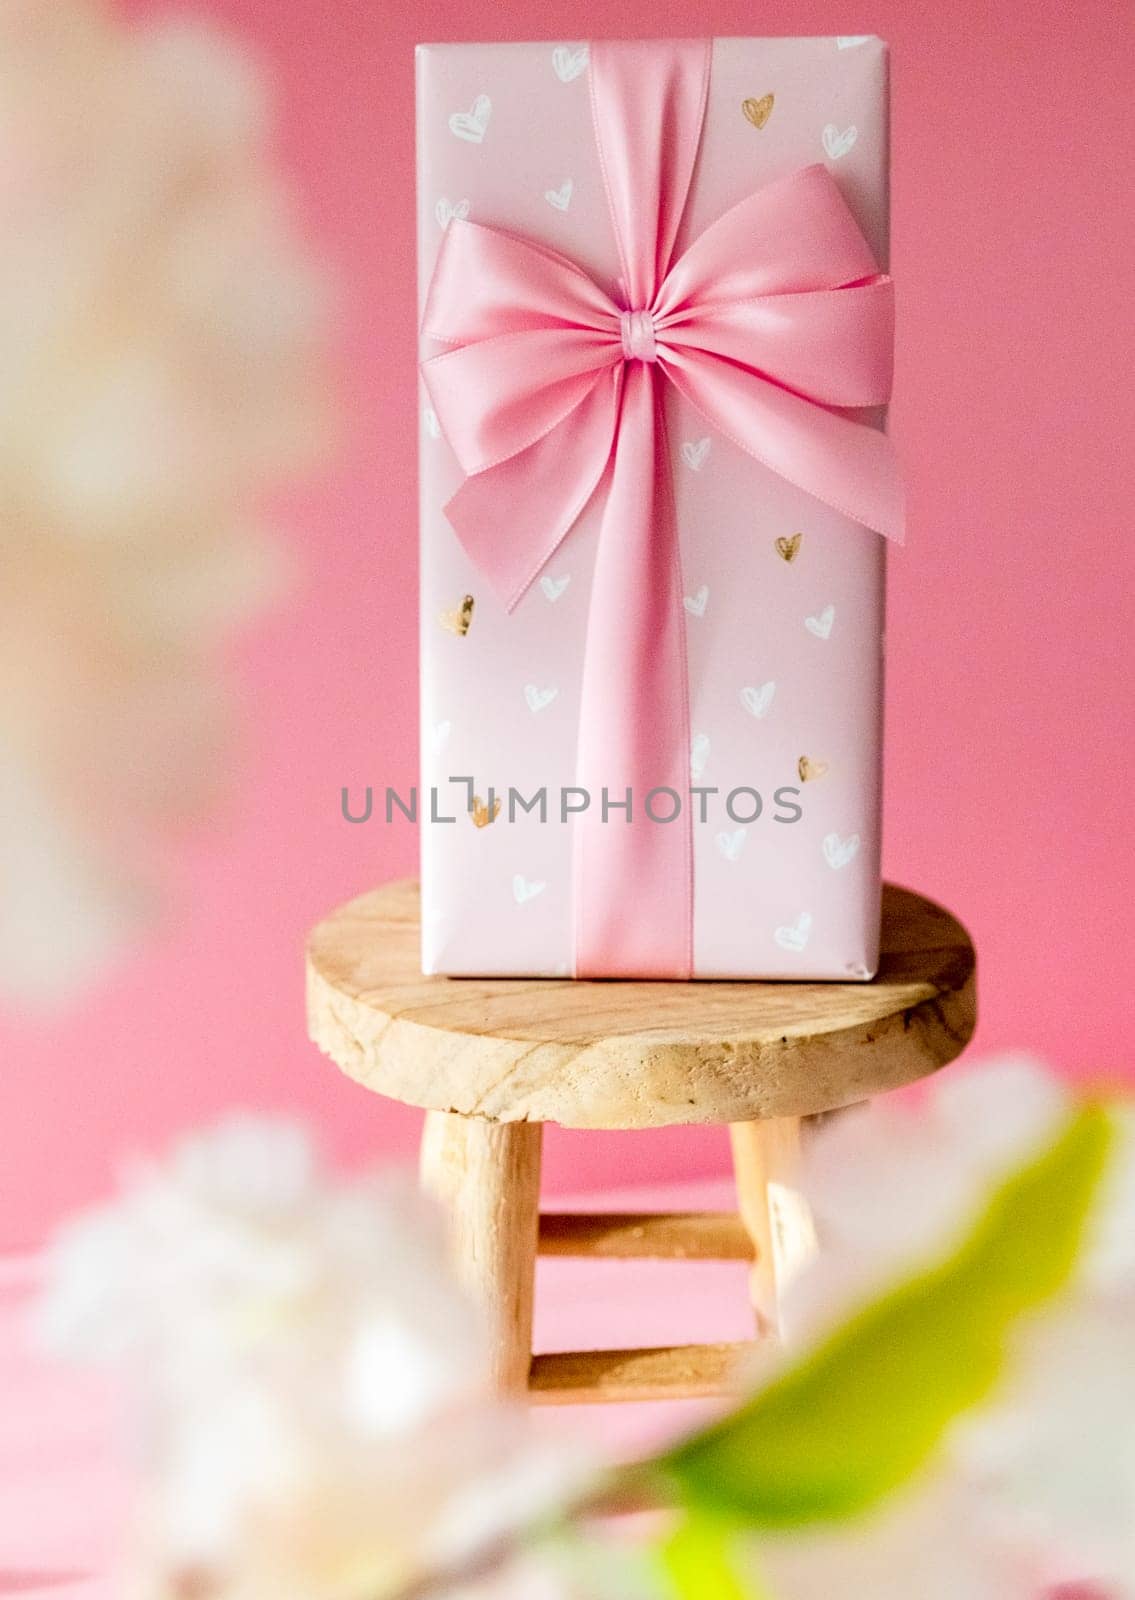 One large gift box with a bow stands on a small wooden stool on a pink background through the blurry branches of an apple tree, close-up side view.